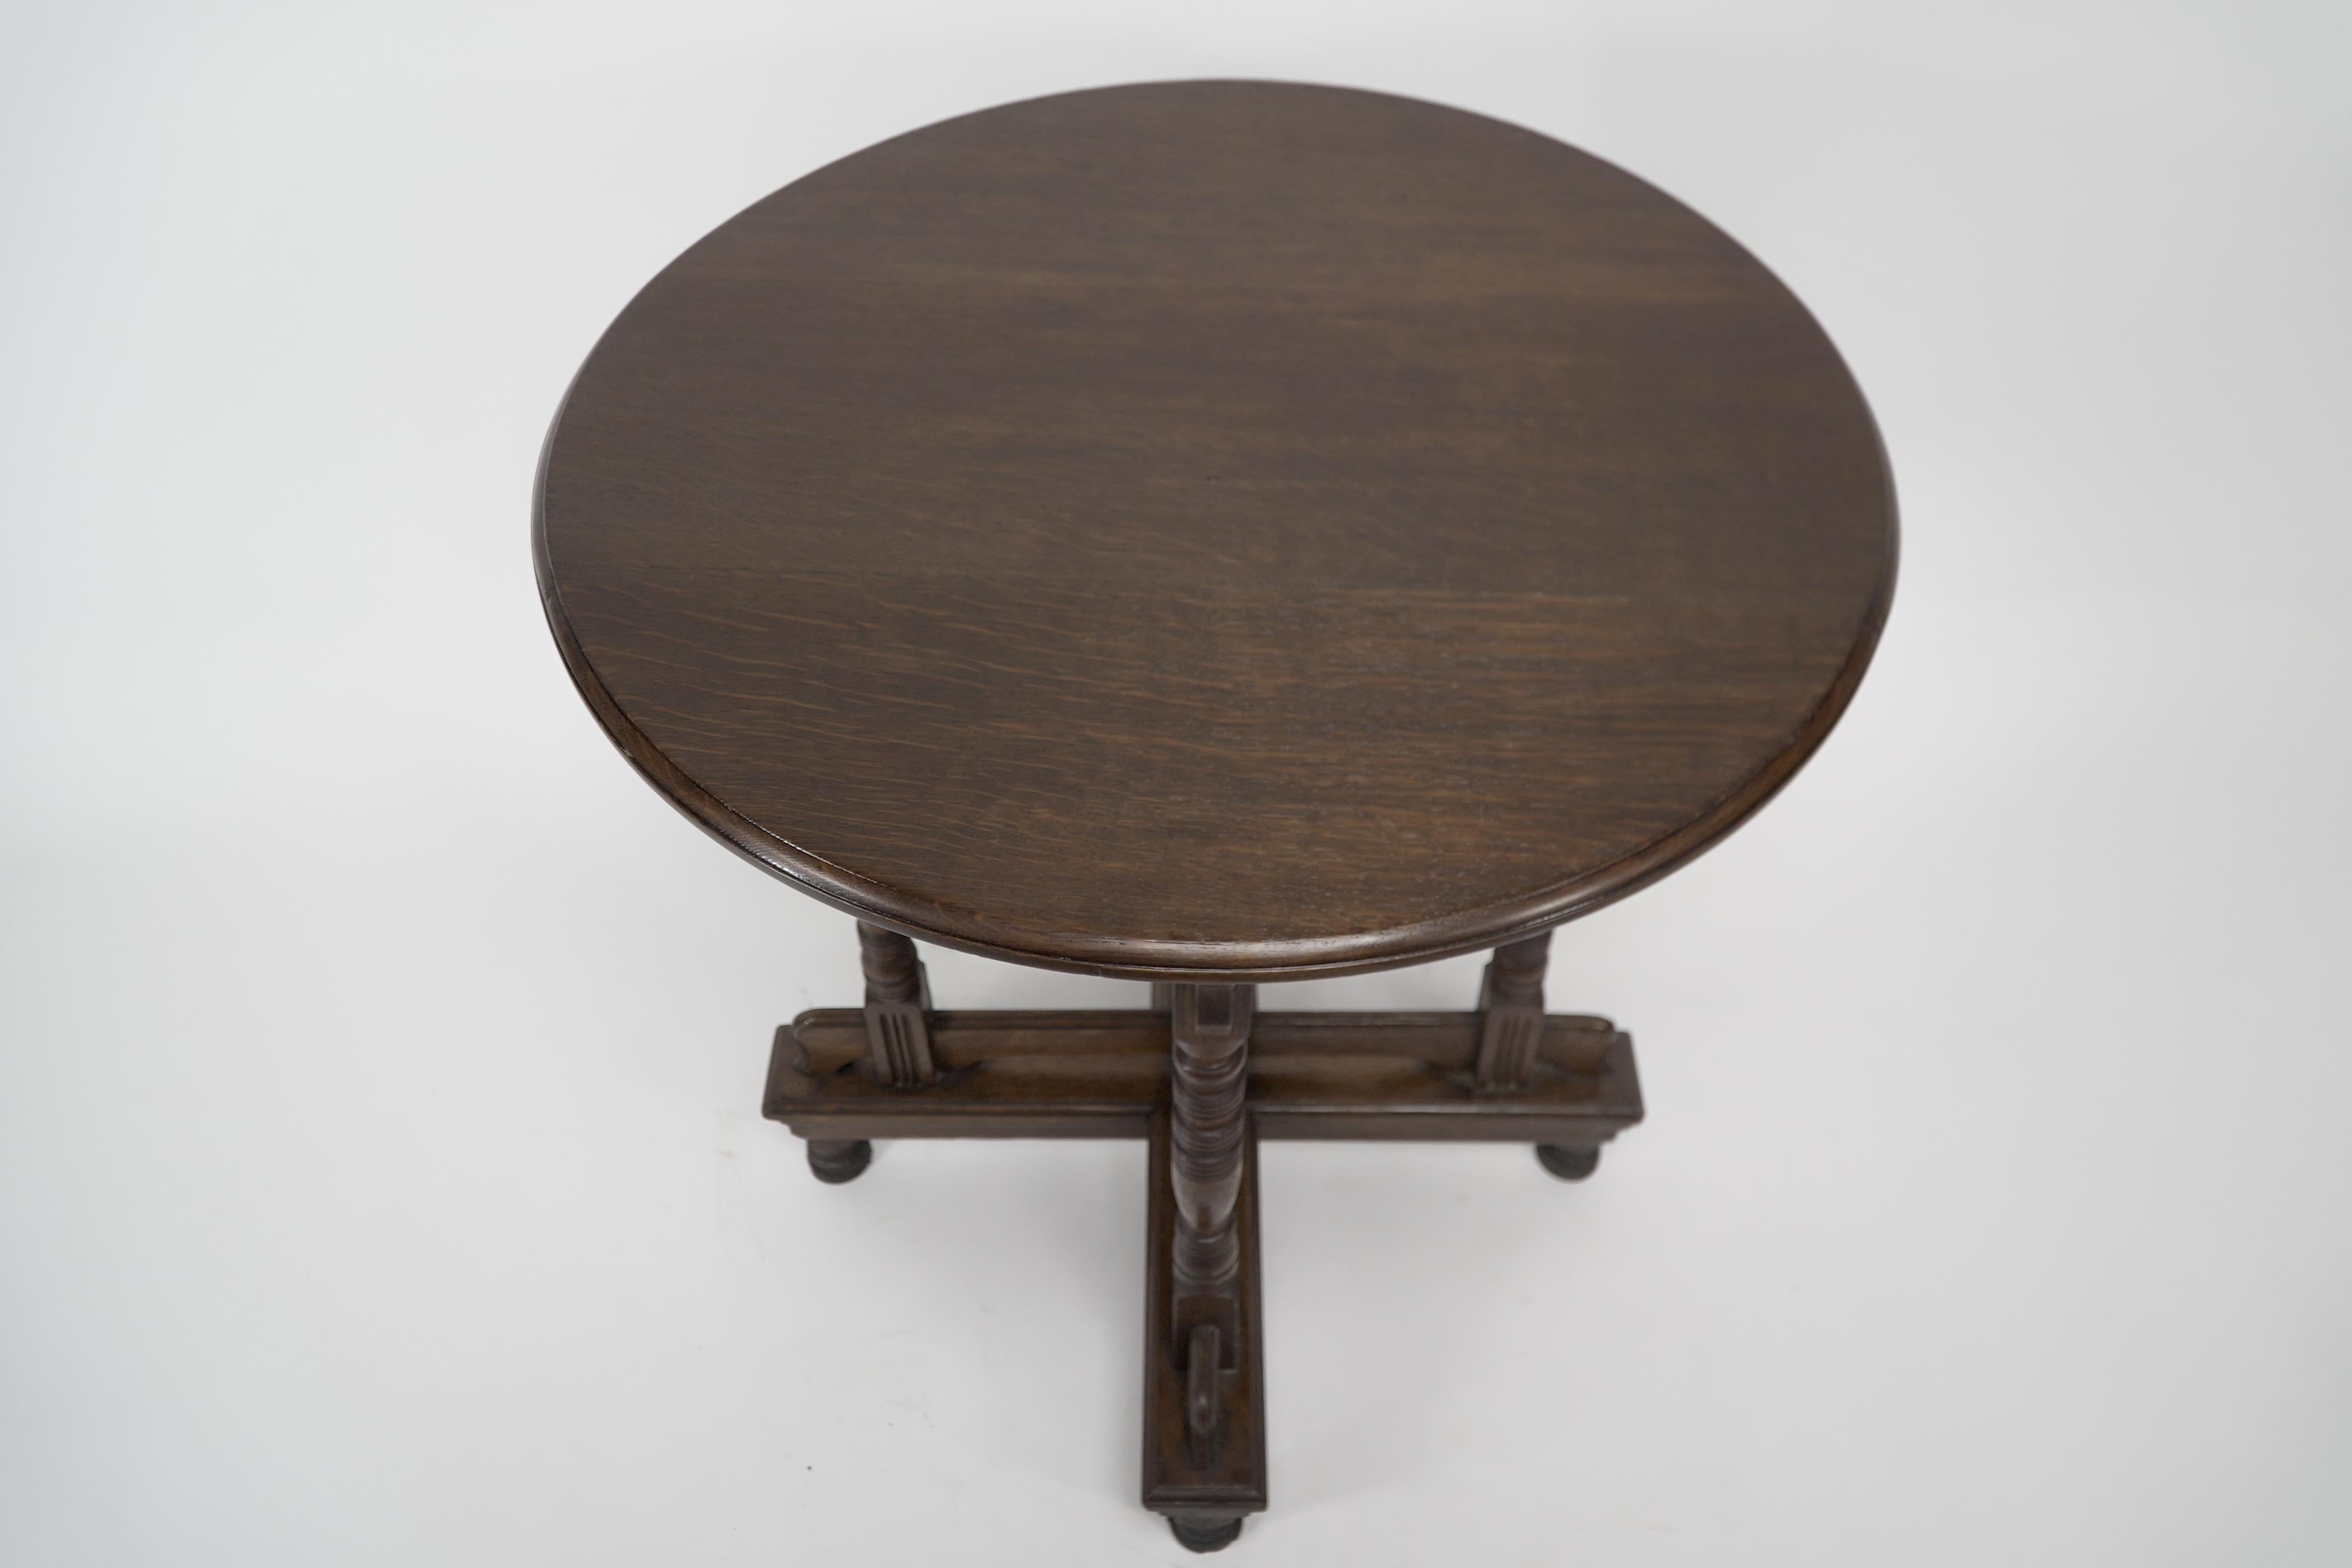 Oak Alfred Waterhouse. A Gothic Revival oak side table with double cross stretchers. For Sale